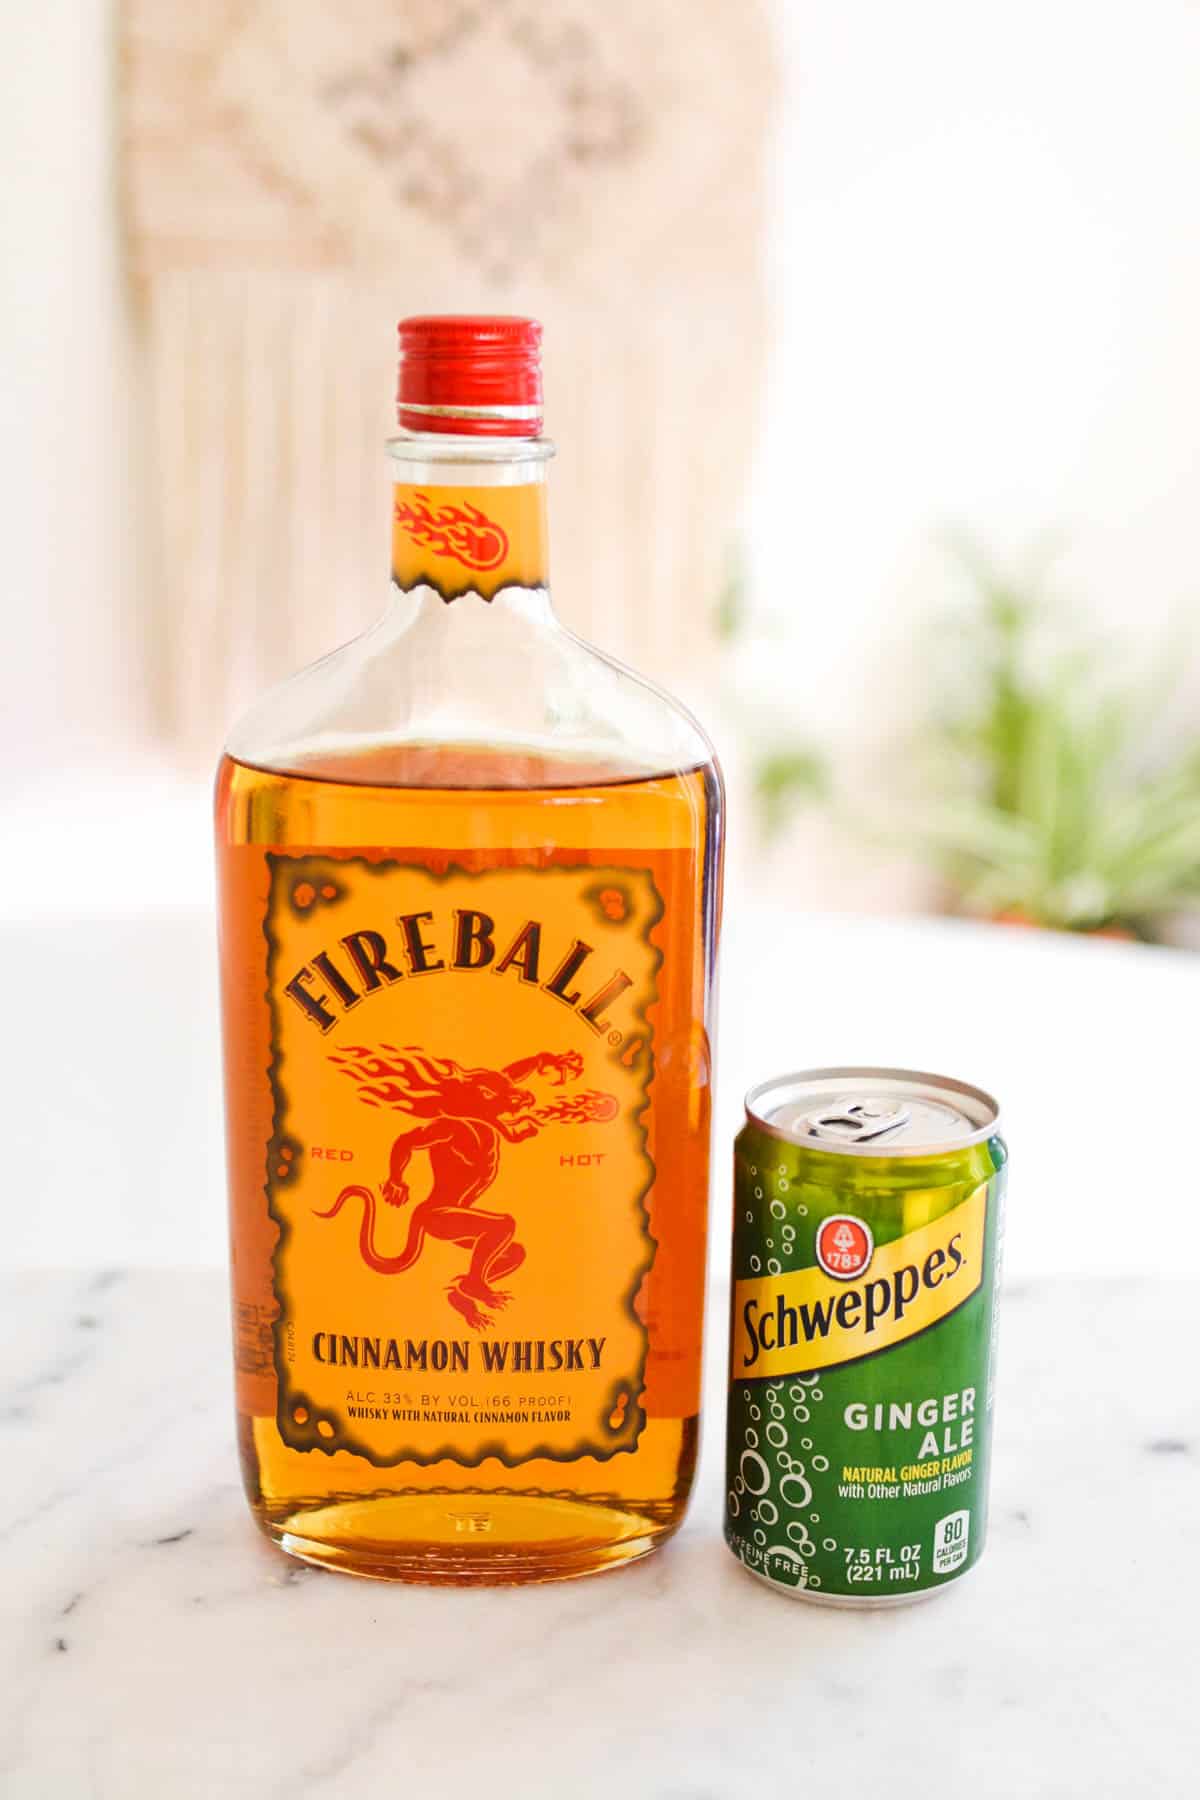 Bottle of Fireball Whiskey and a small can of ginger ale.